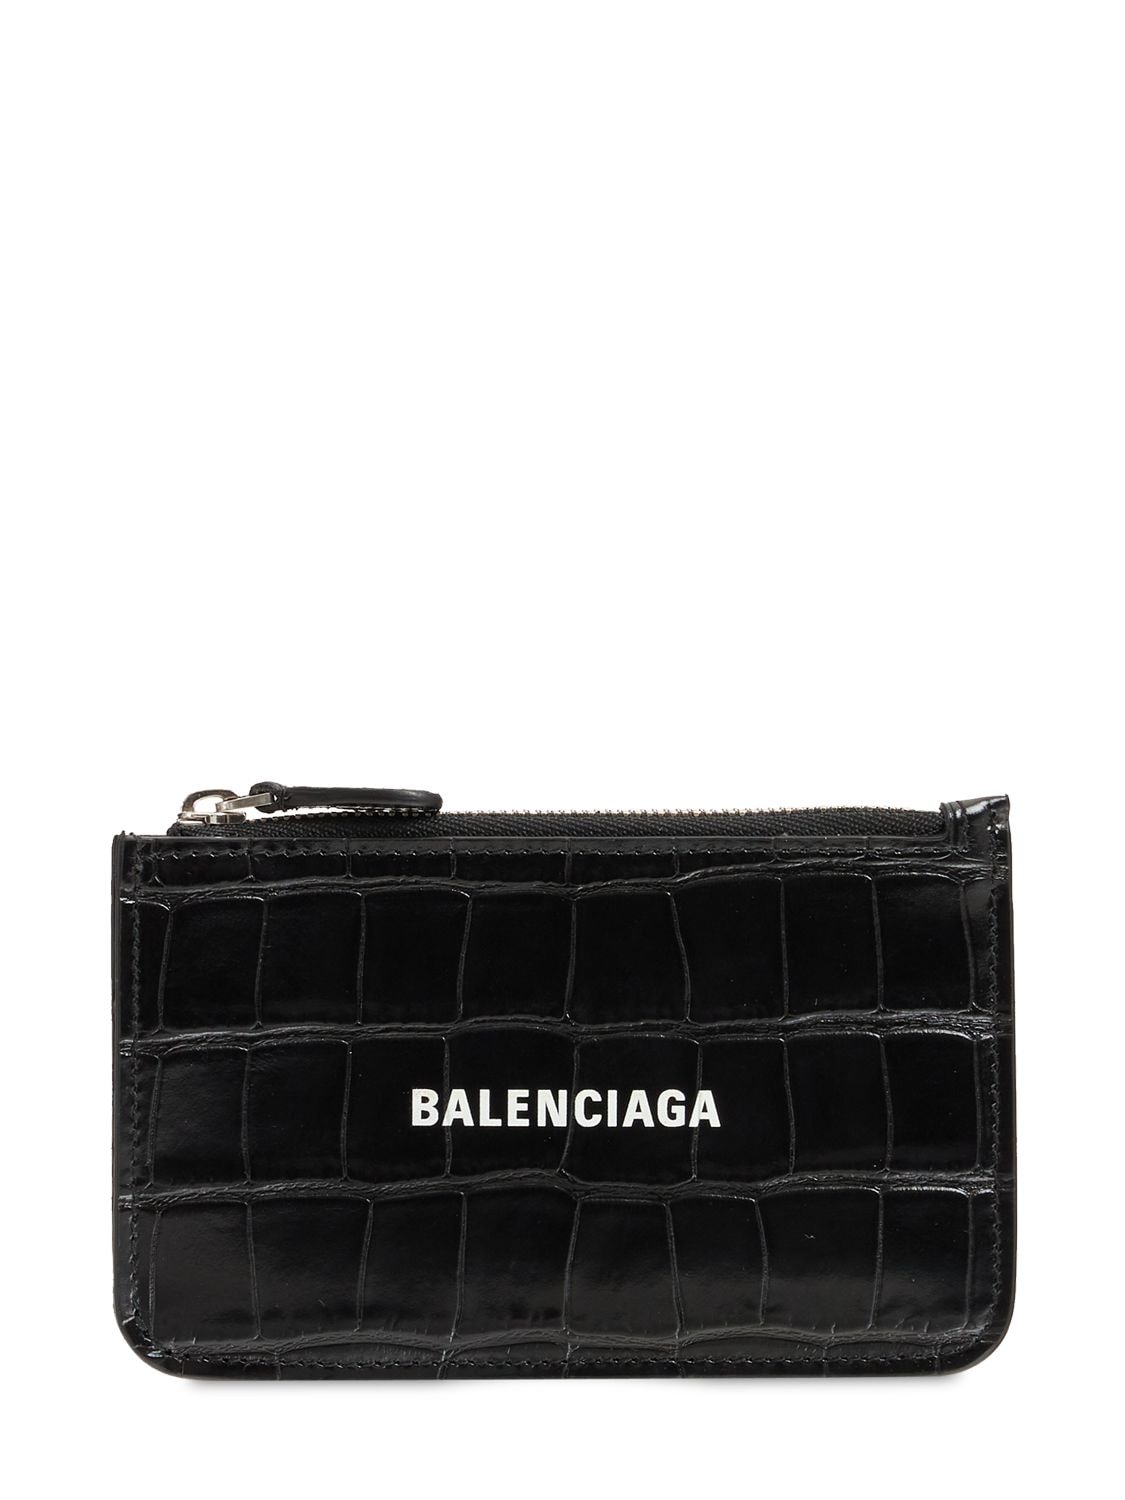 Balenciaga Croc Embossed Leather Card Holder In Black